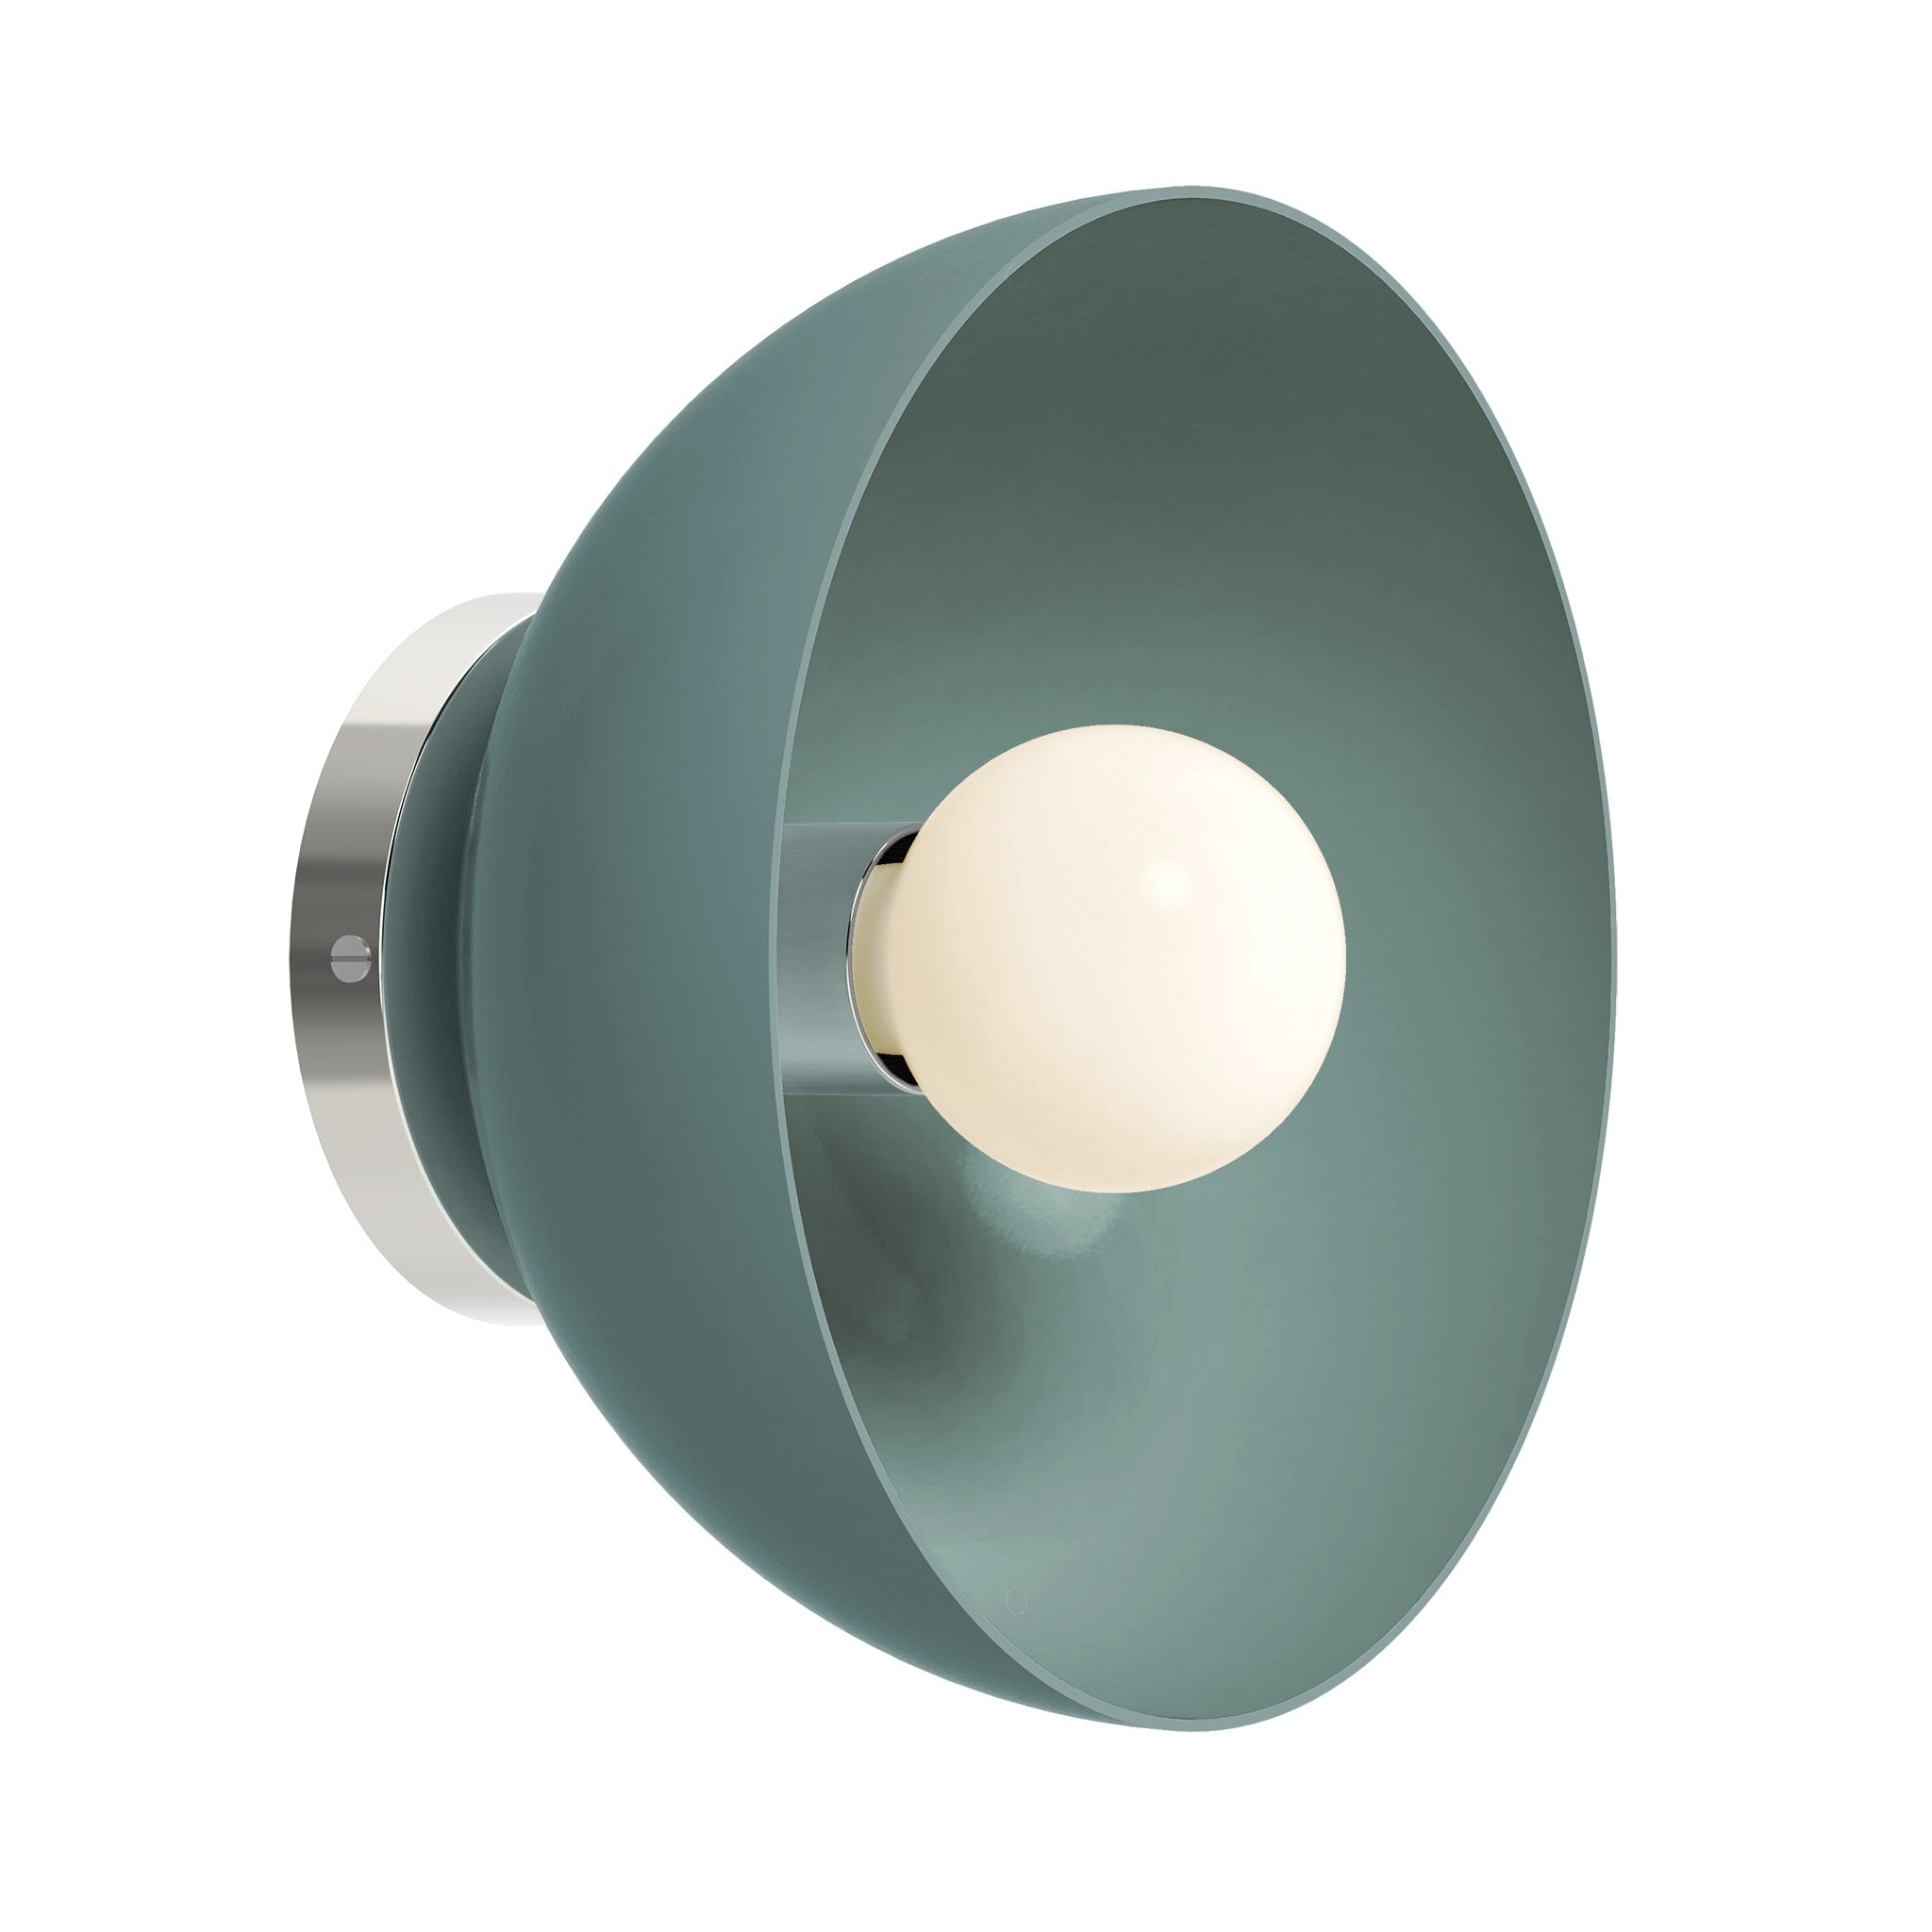 Nickel and python green color hemi dome sconce 10" Dutton Brown lighting